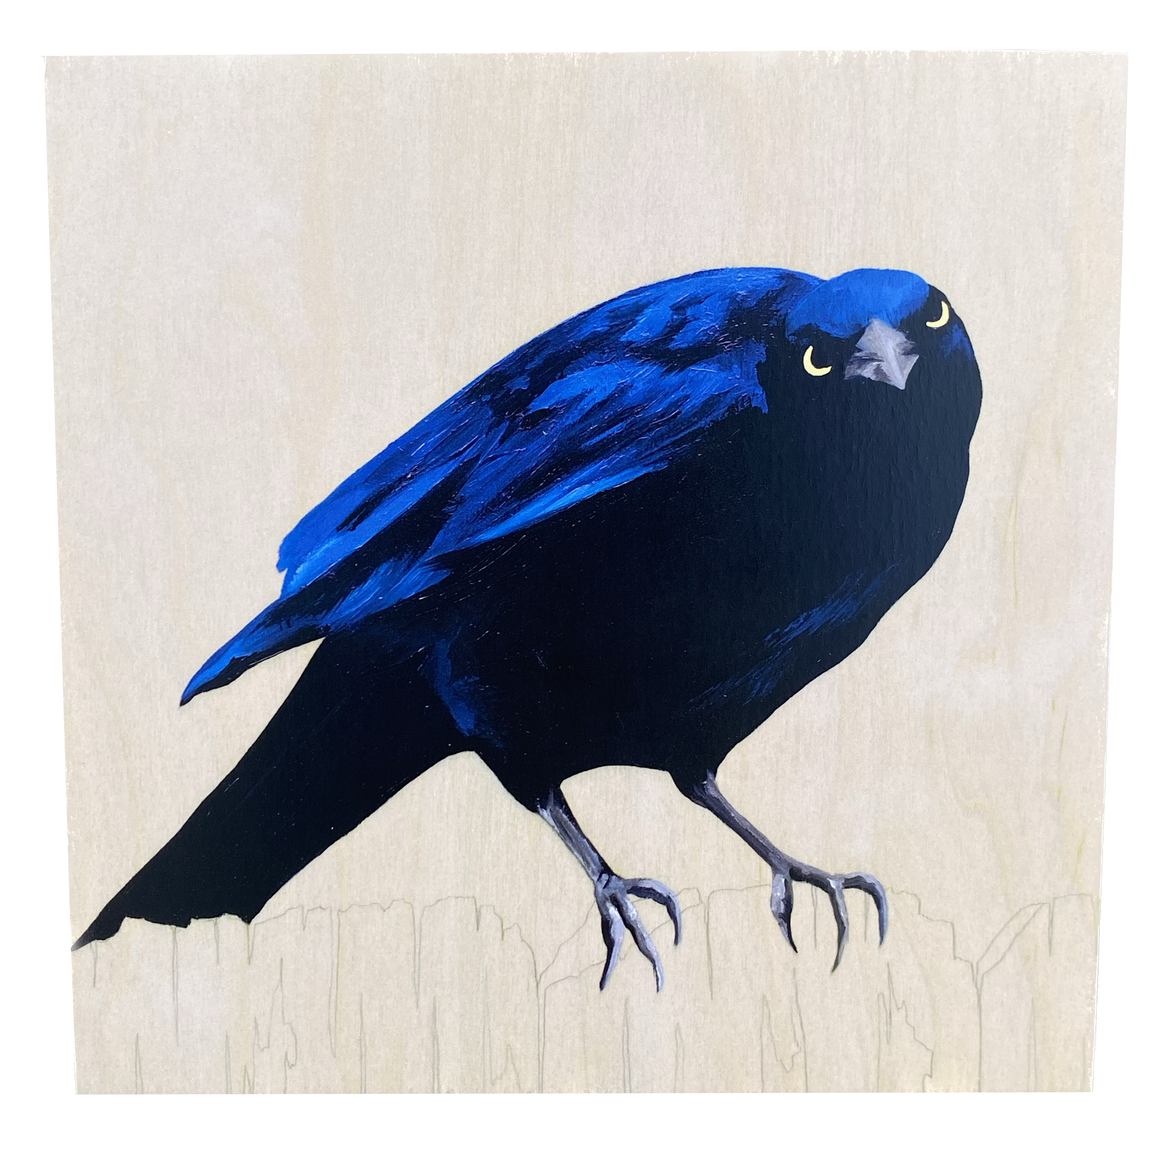 Grackle #43 - Carly Weaver - 12 x 12"